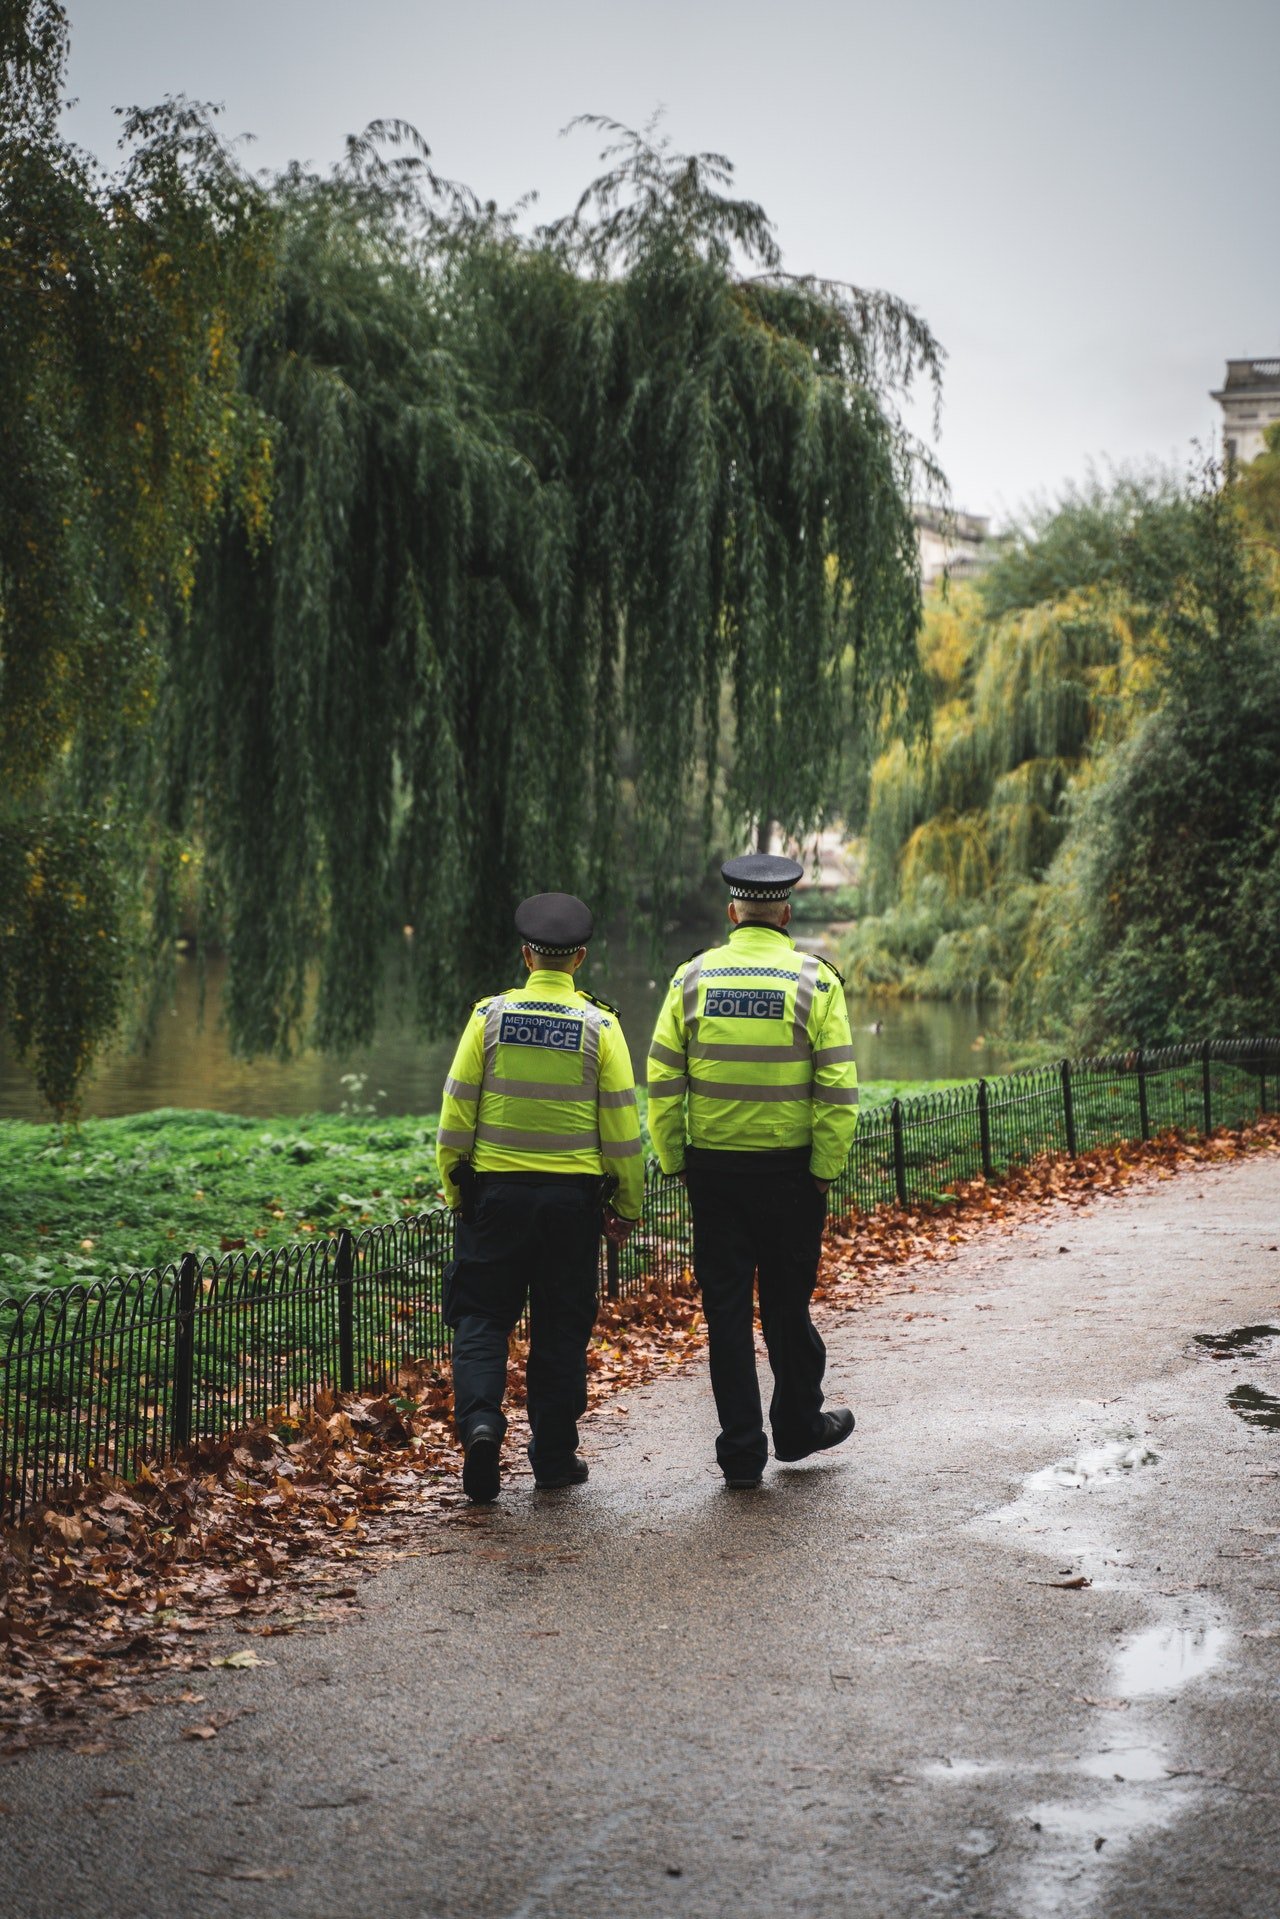 Photo of two police officer walking down the road | Photo: Pexels